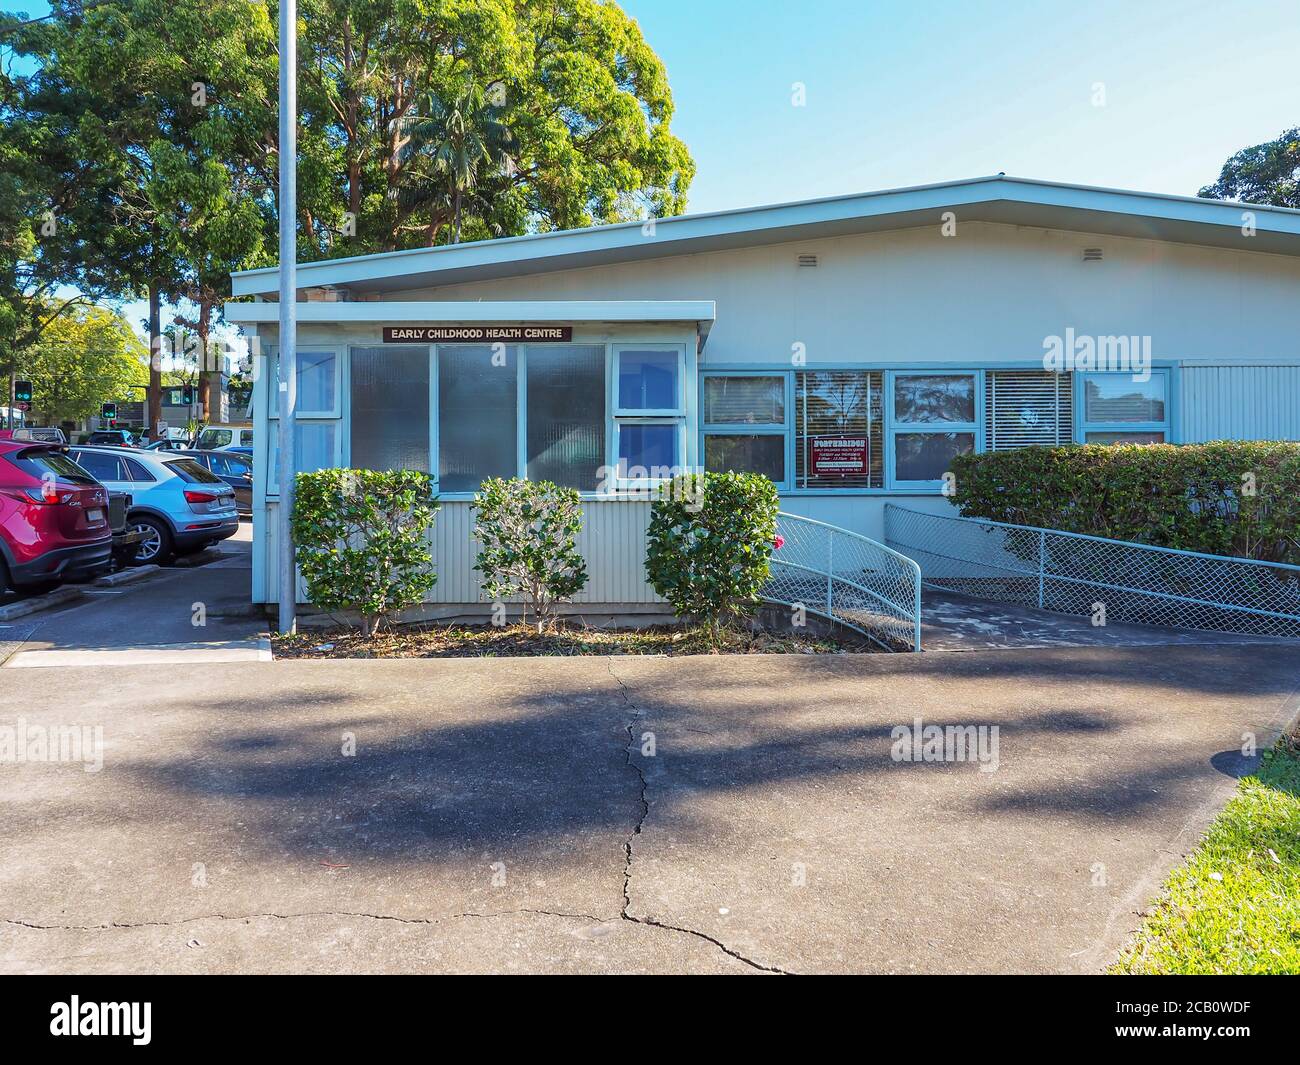 Sydney NSW Australia May 28th 2020 - Early Childhood Health Centre Sign on a sunny autumn afternoon Stock Photo